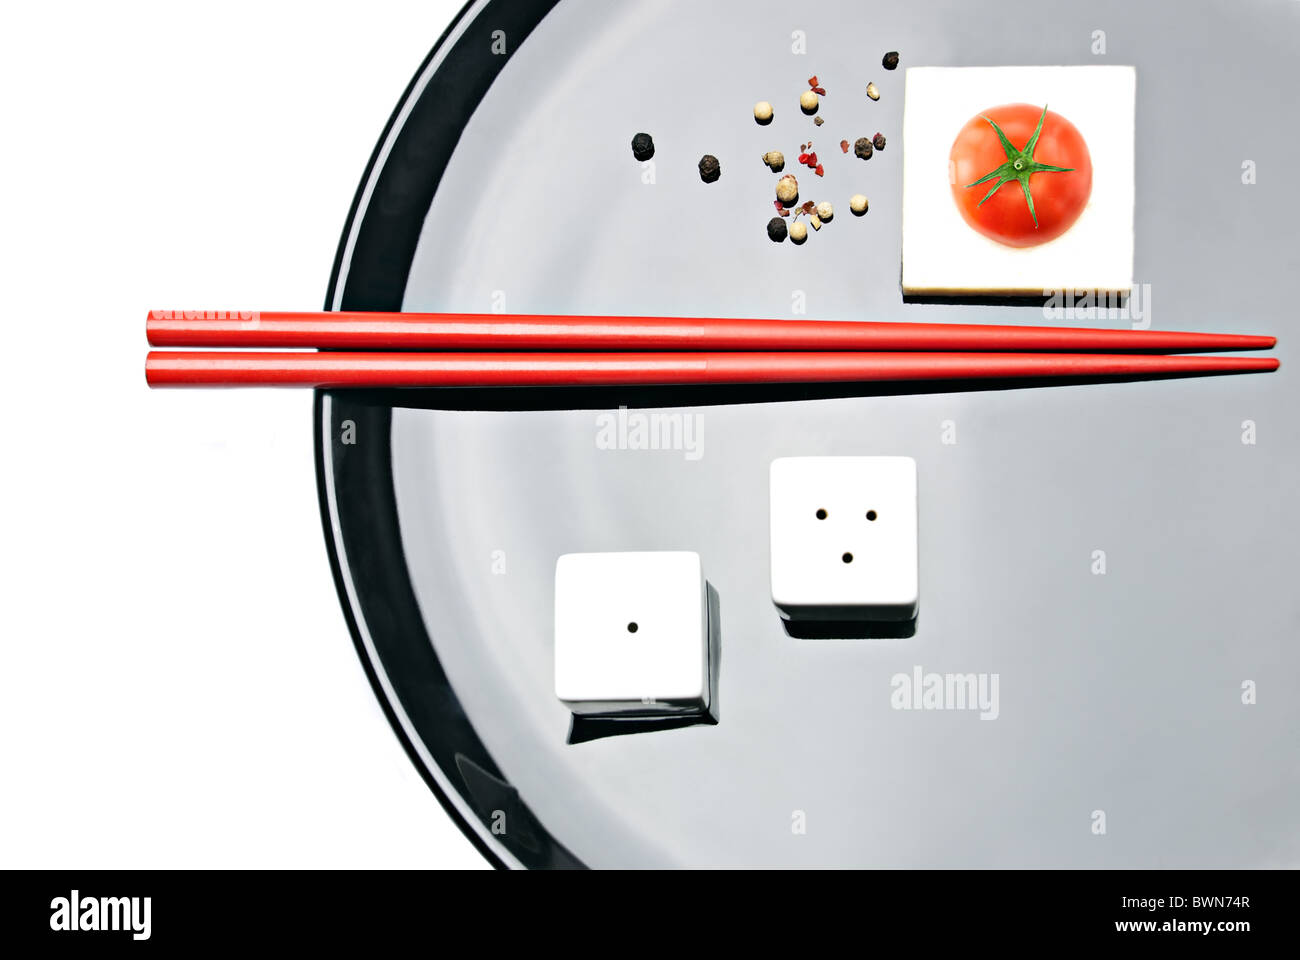 Asian Food Composition. Chopsticks, cherry tomato, salt & pepper, and white tofu cheese on plate Stock Photo